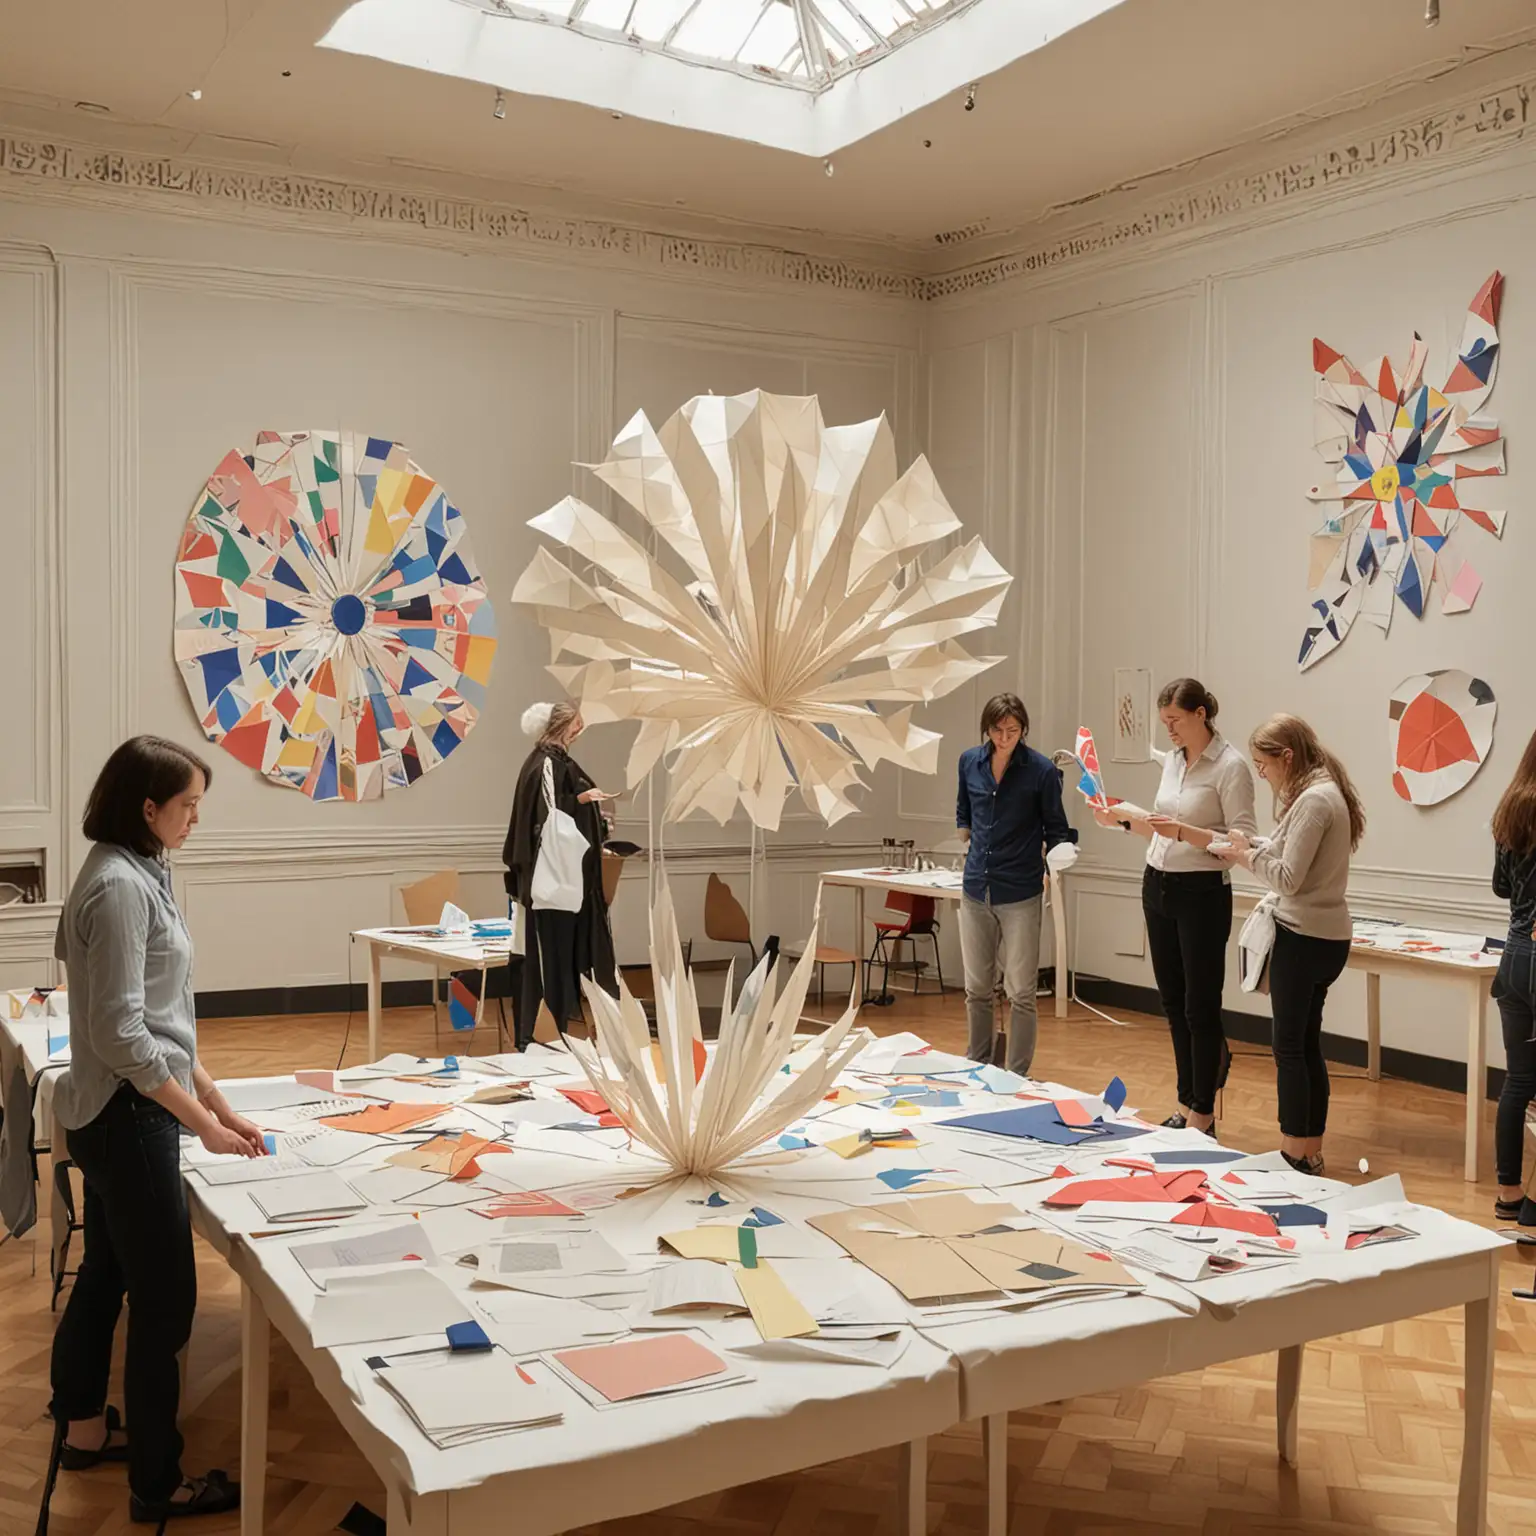 Abstract Origami Art Exhibition with Kandinsky and Hilma af Klint Influences